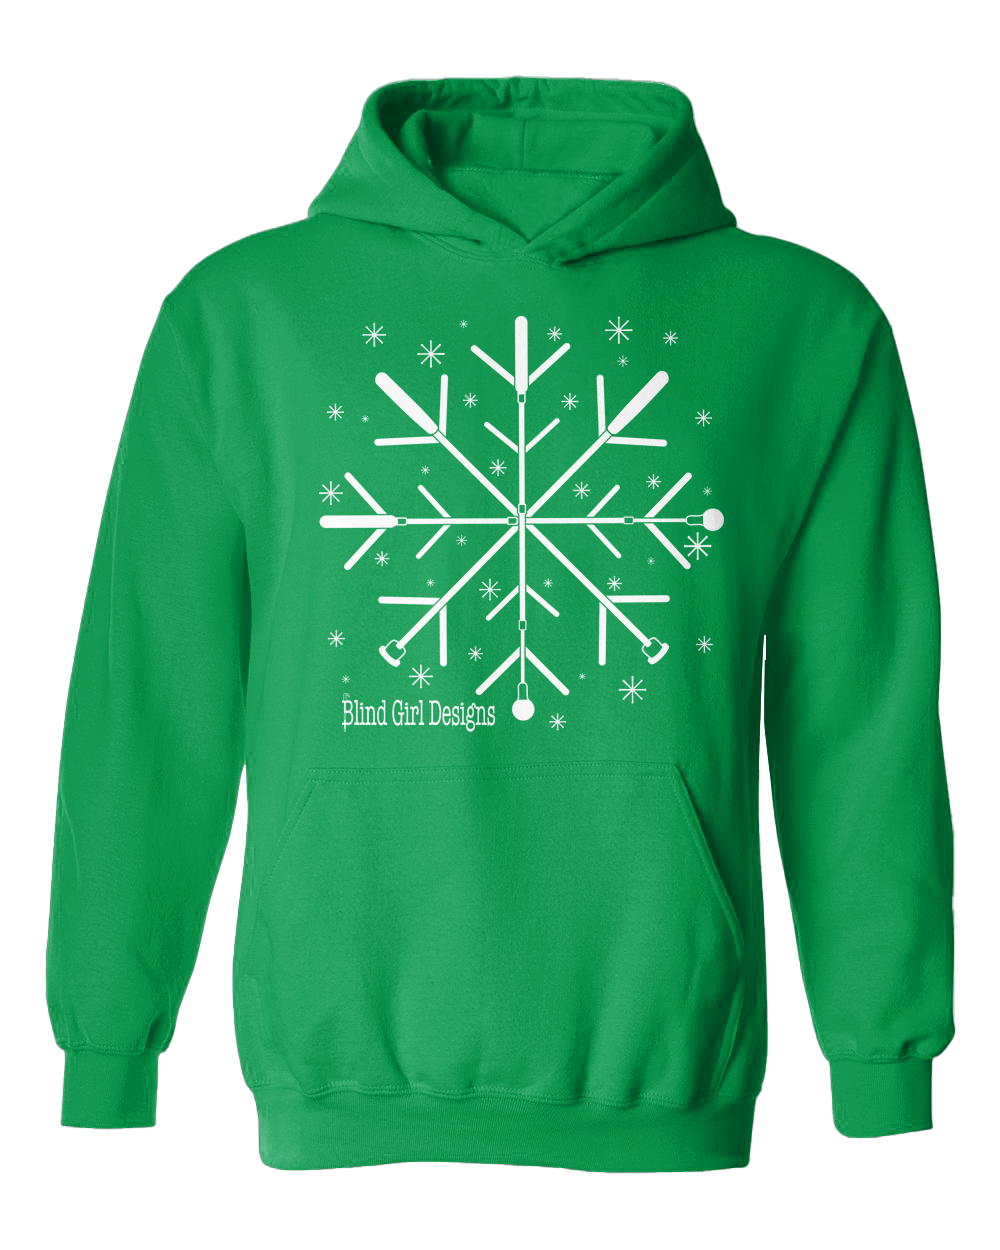 New!! 3D  Tactile! Snowflake White Cane  Hoodie -  Irish green with white ink